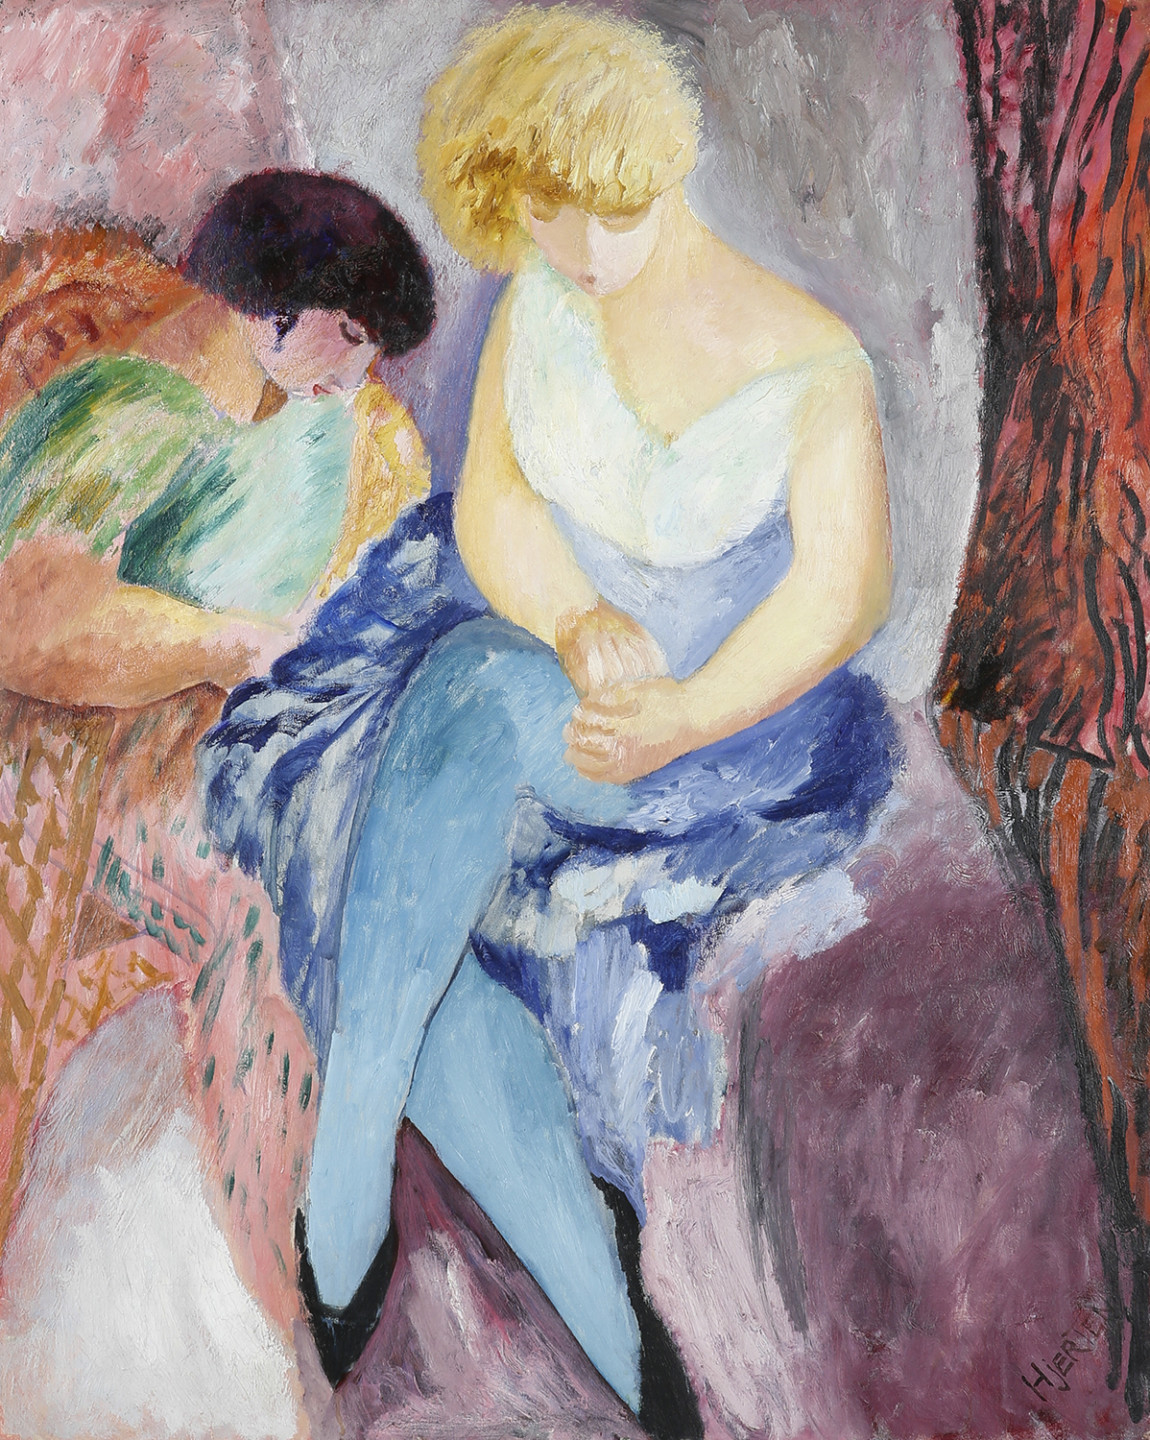 Painting with two females sitting close to each other